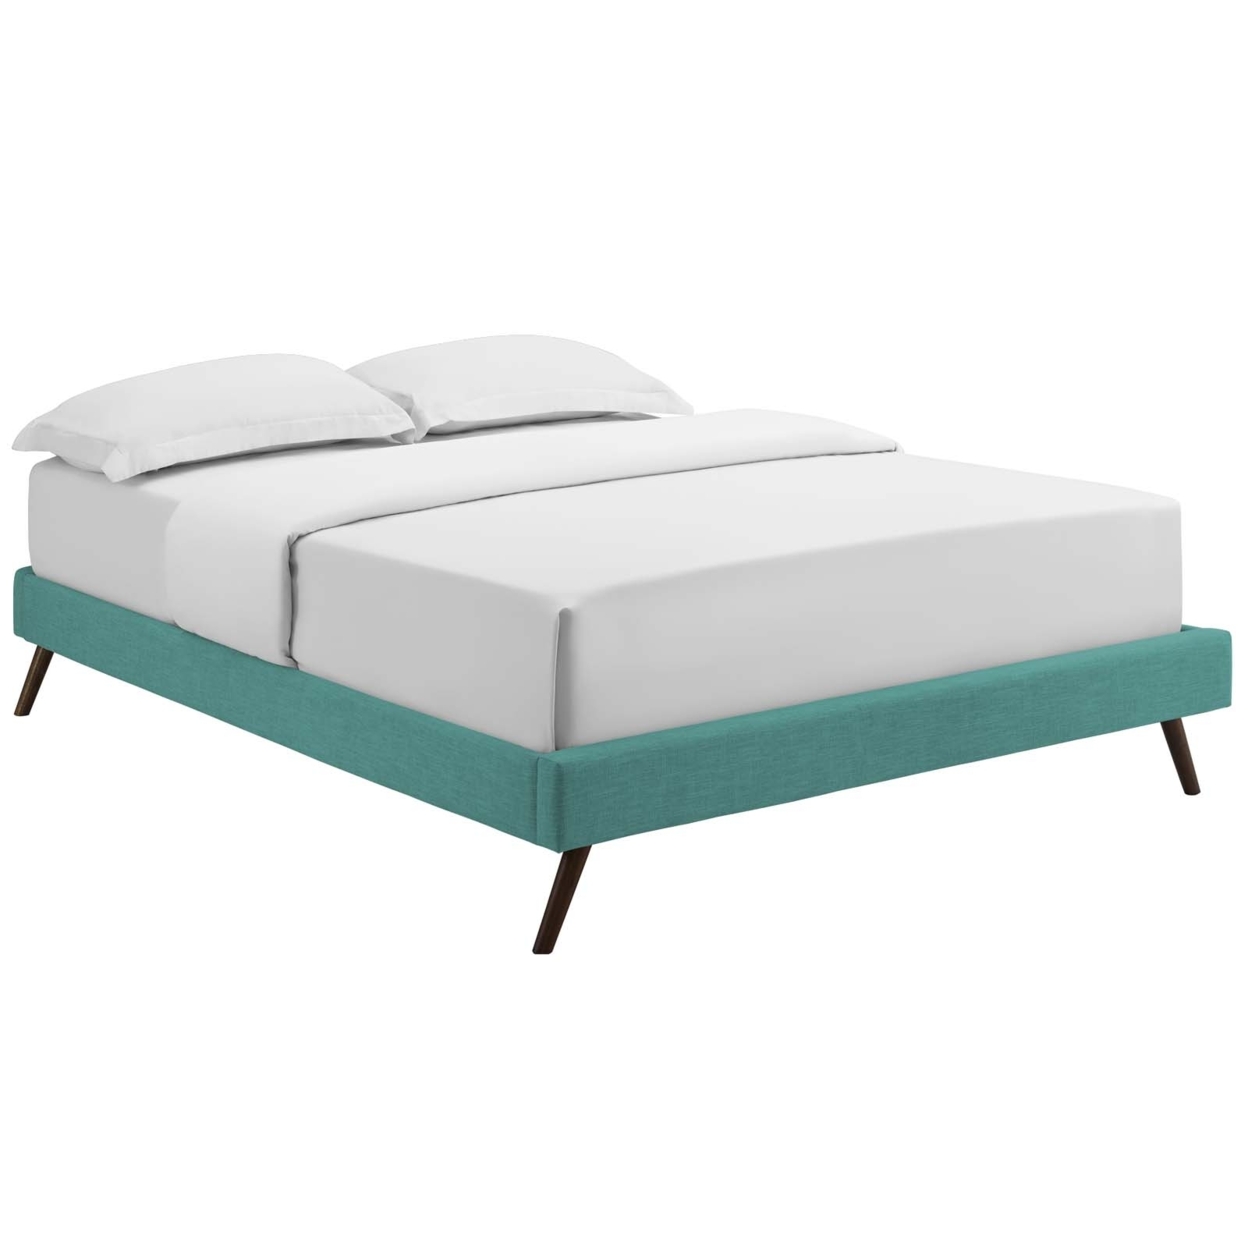 Loryn Full Fabric Bed Frame With Round Splayed Legs, Teal